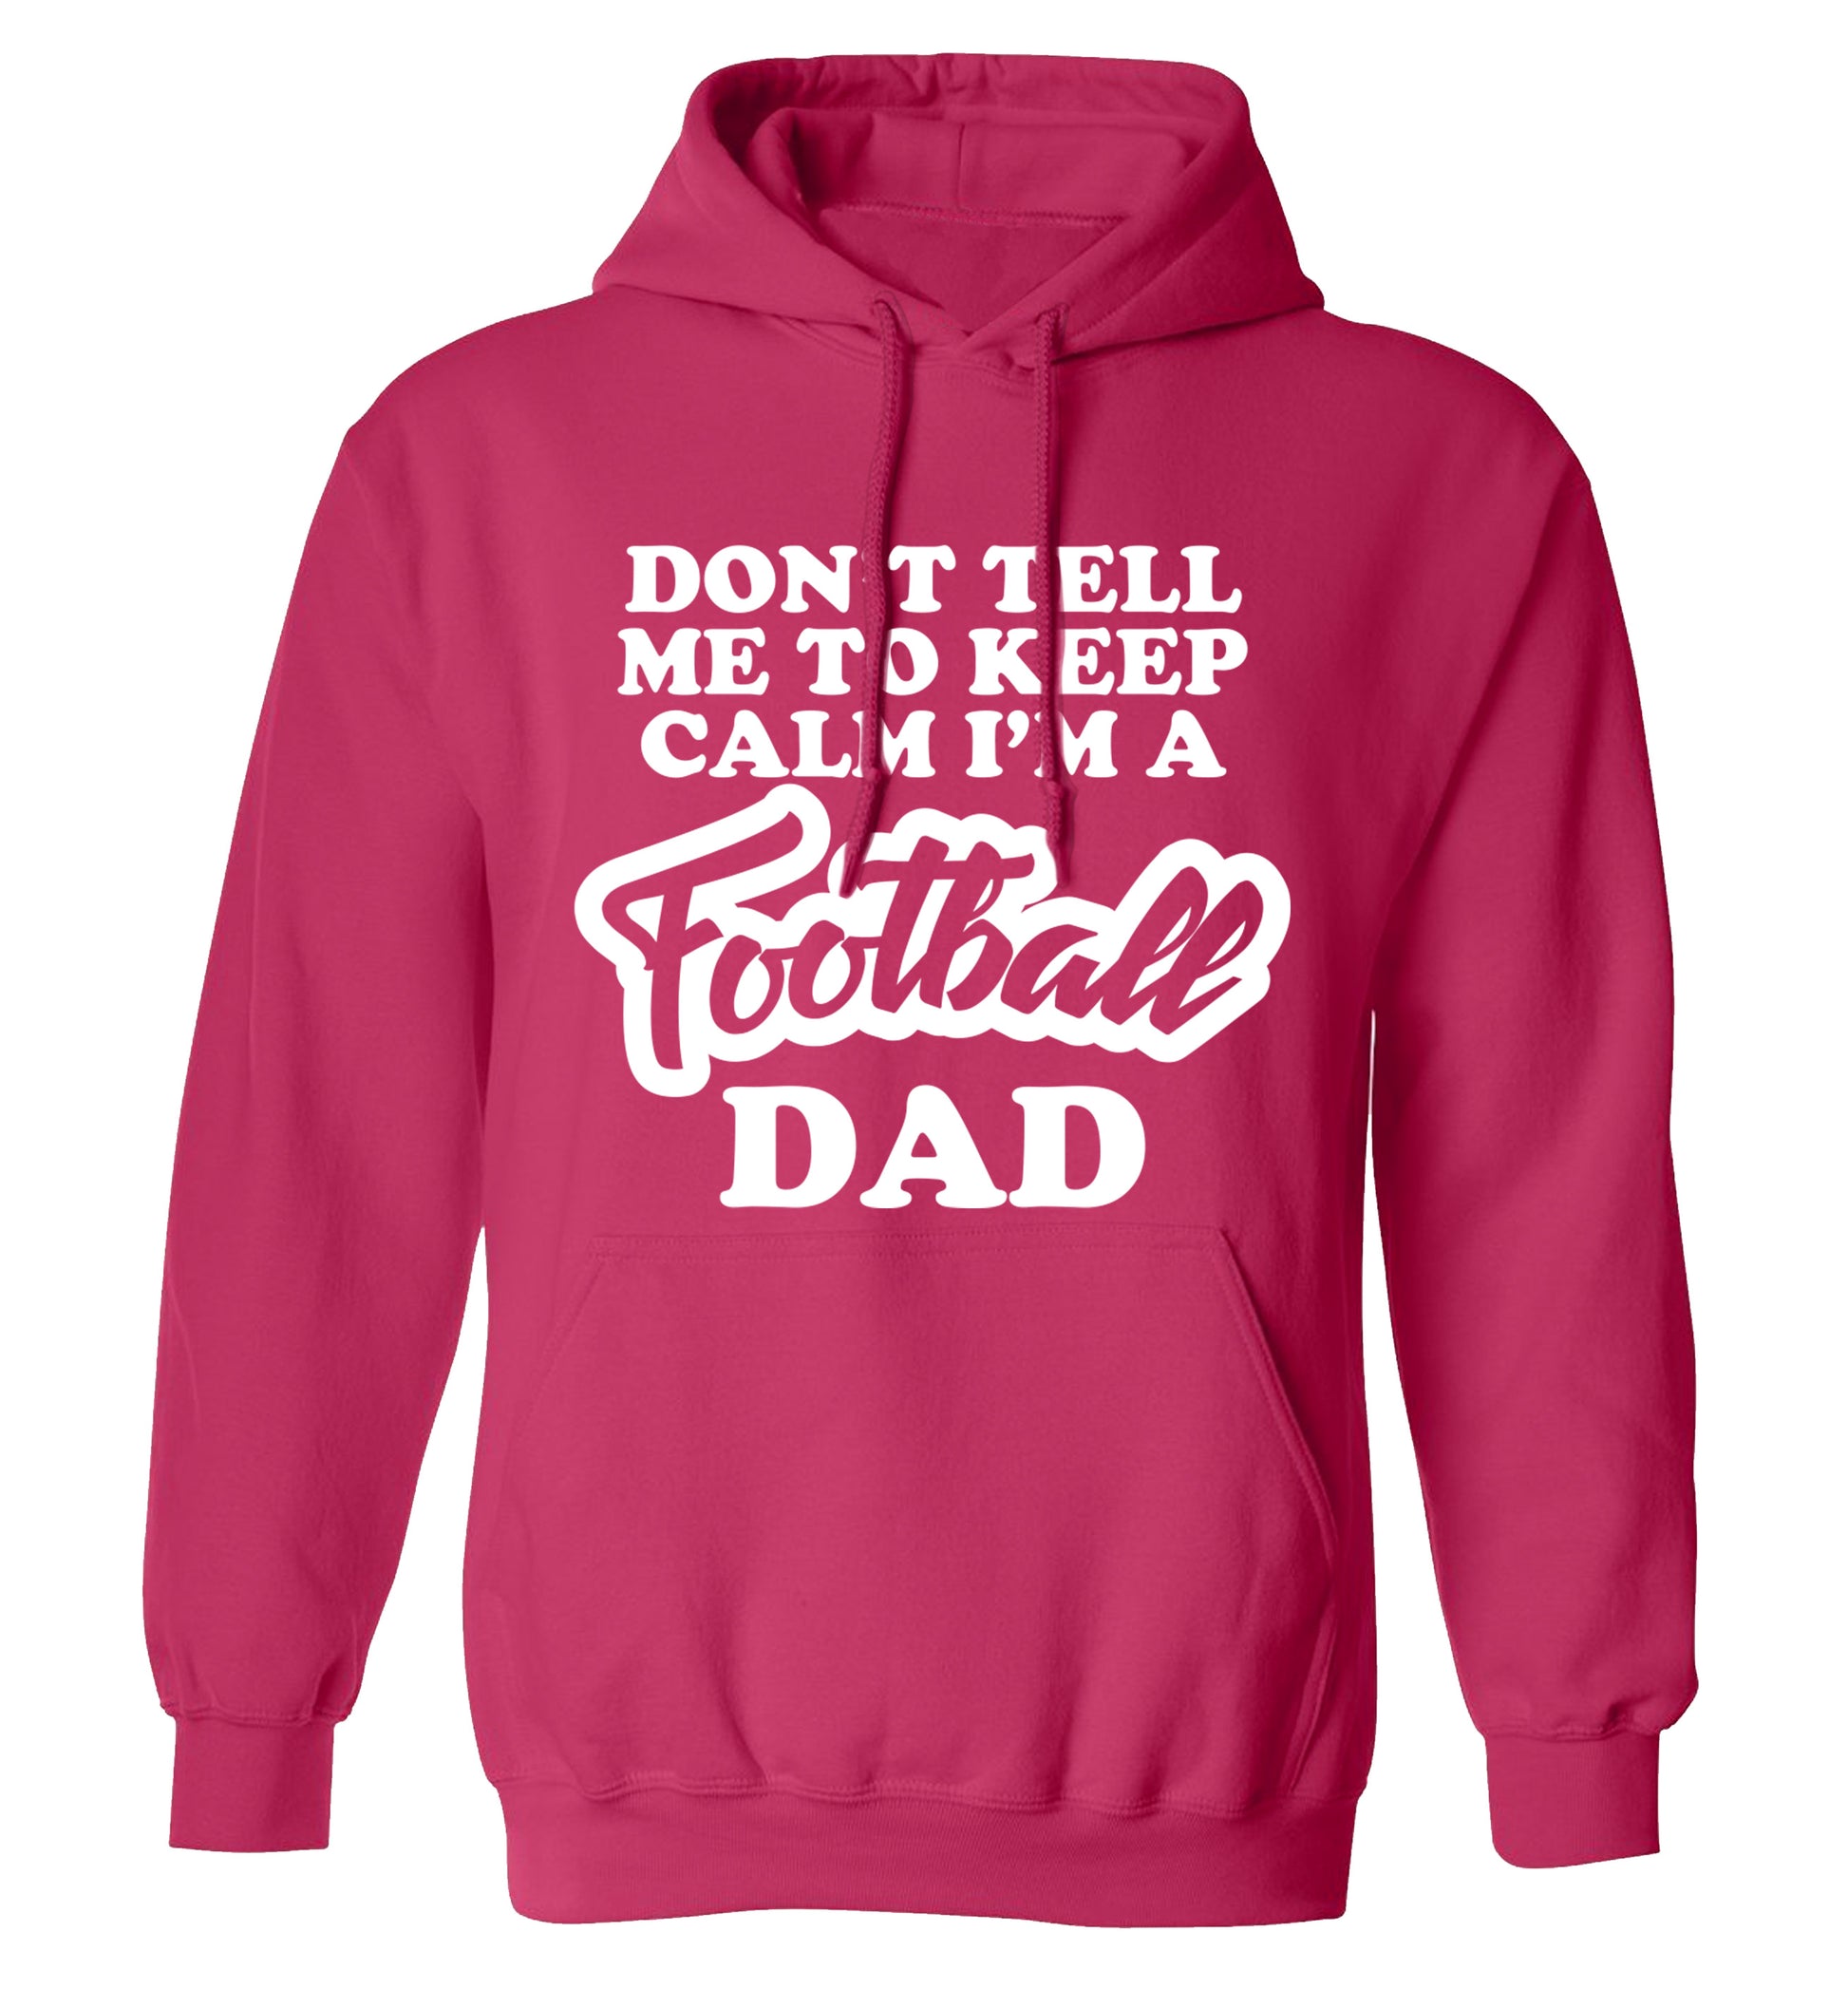 Don't tell me to keep calm I'm a football grandad adults unisexpink hoodie 2XL